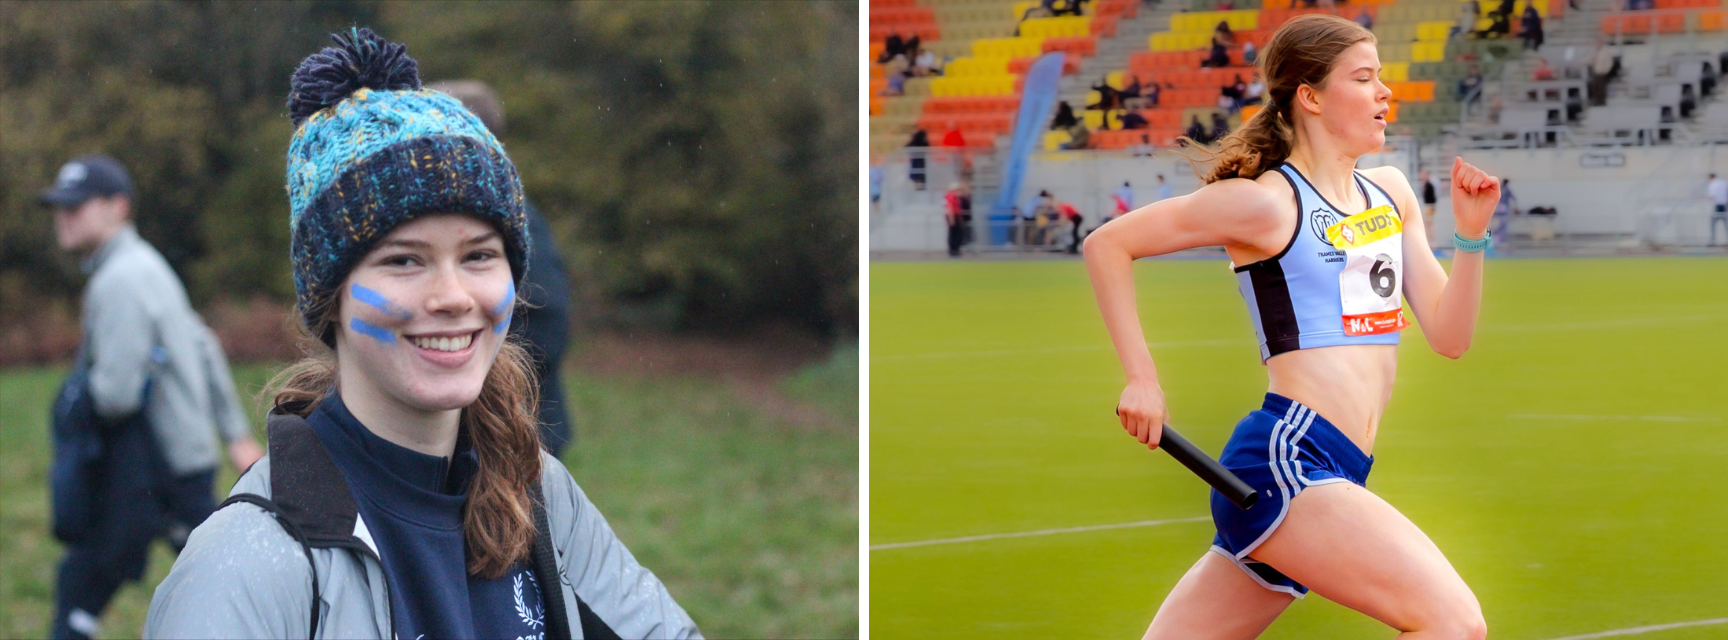 Profile picture of Ella Fryer and picture of Ella Fryer running